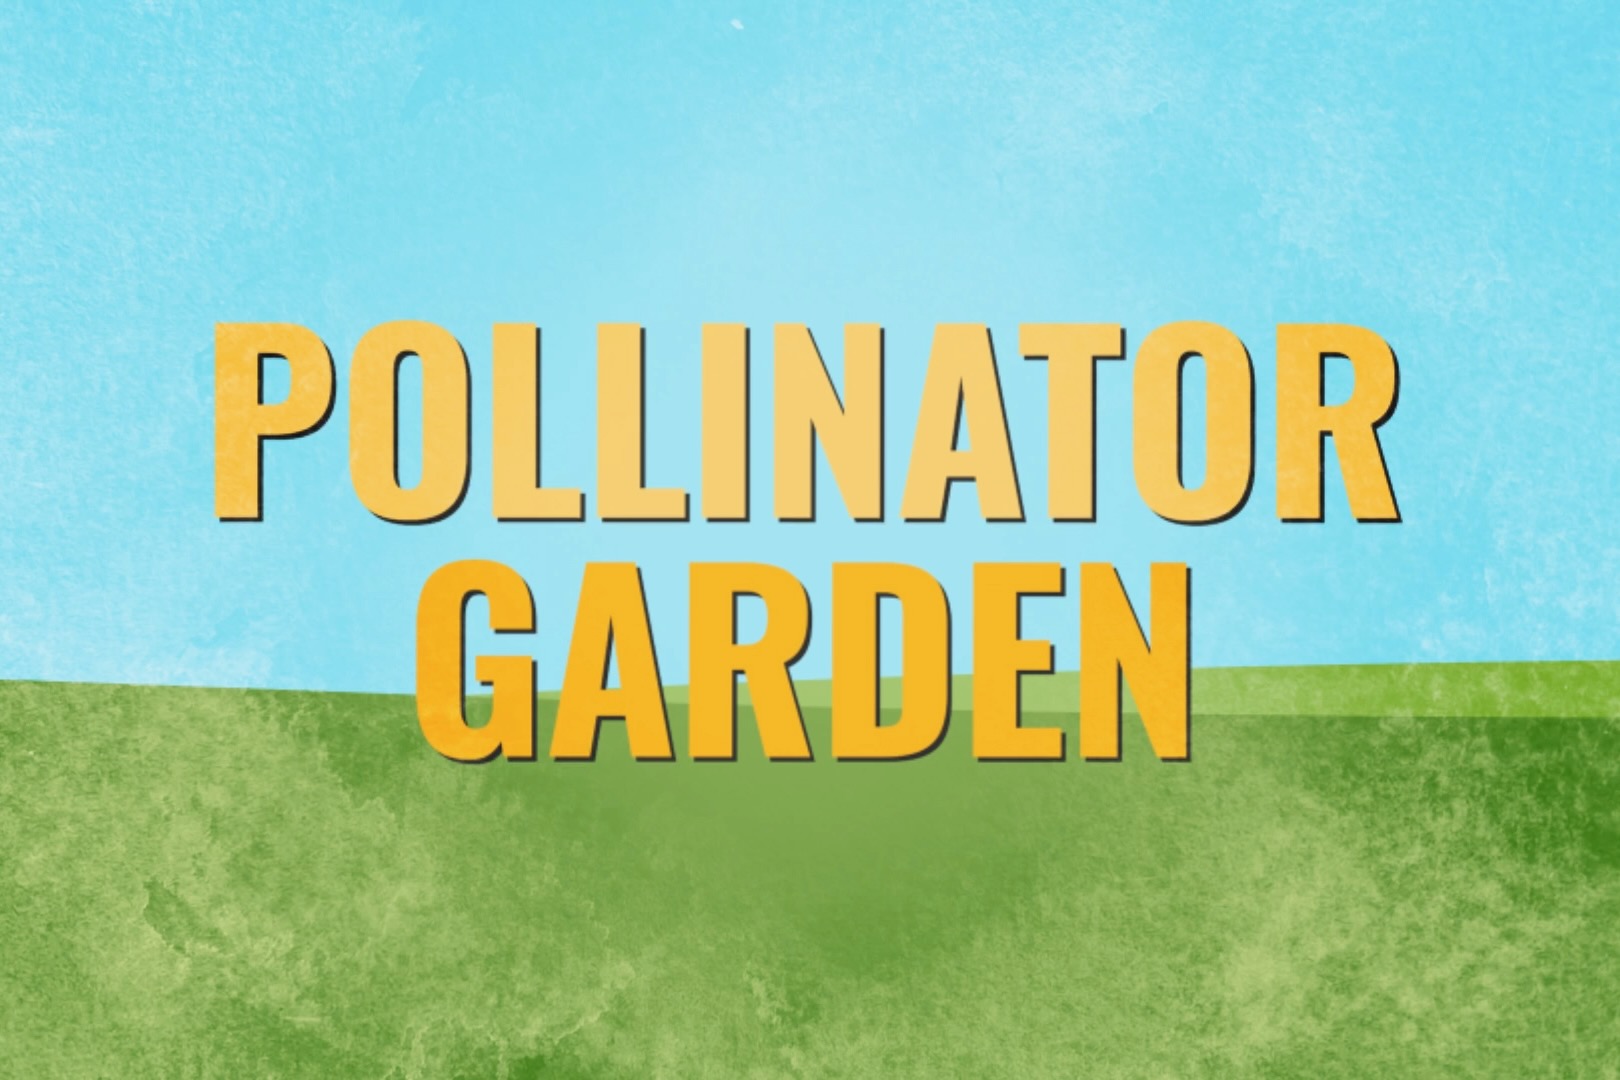 Illustrated green grass and blue sky with the words "pollinator garden" in large yellow font.